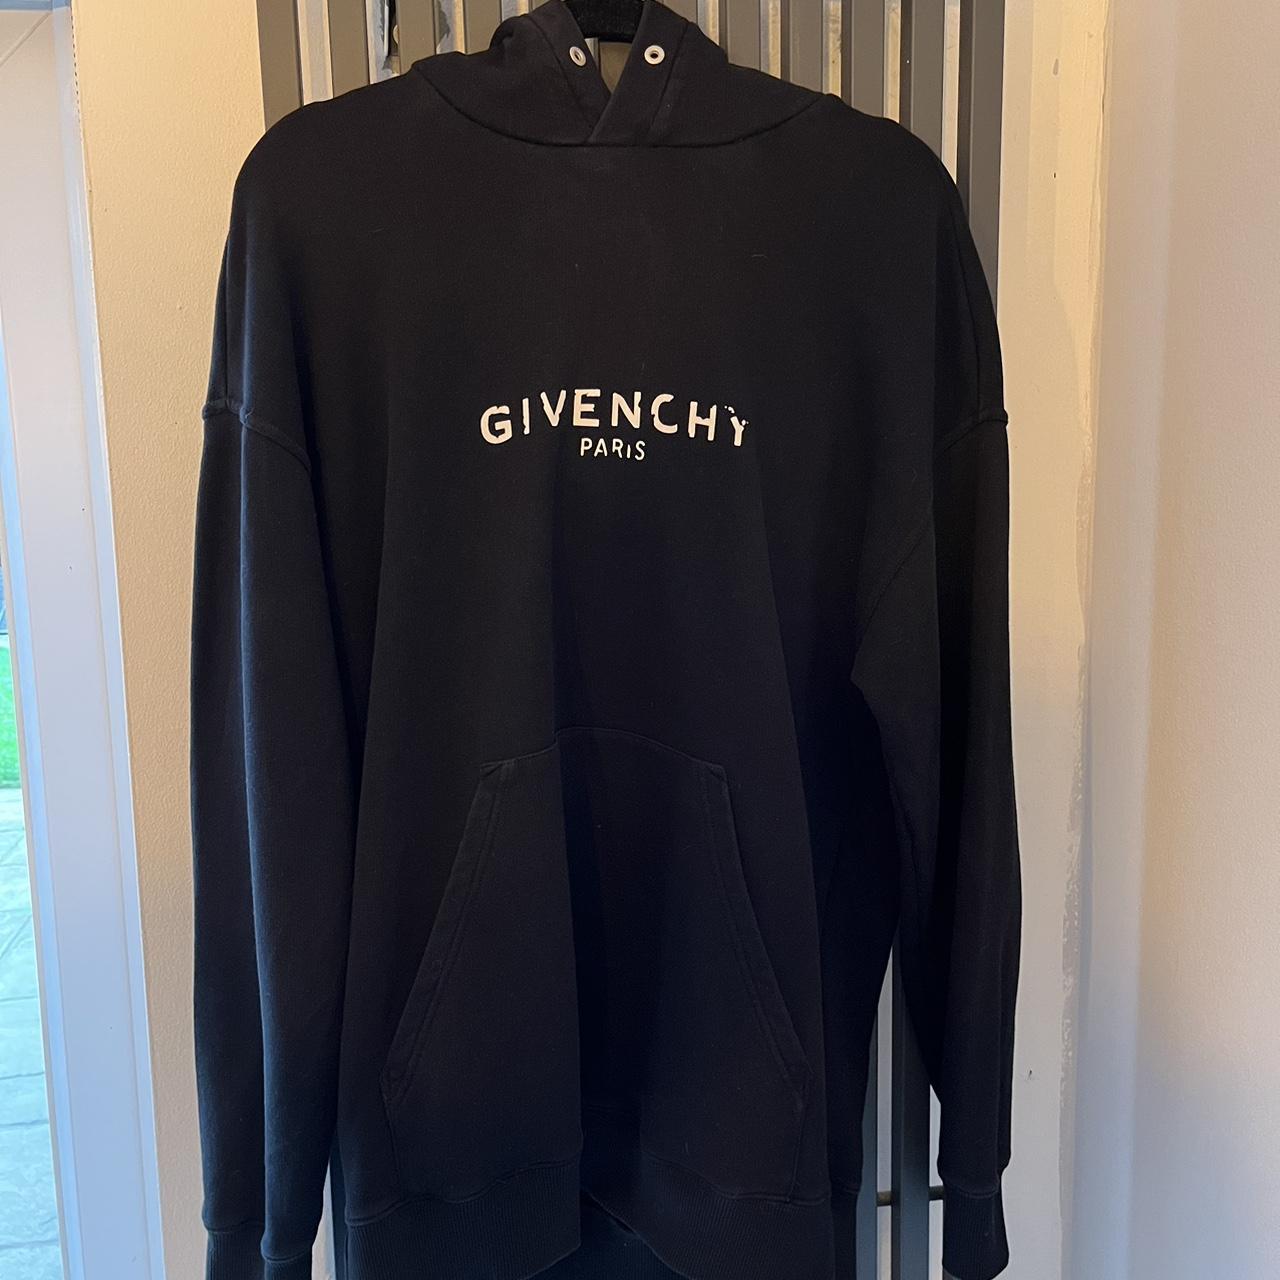 Givenchy Label Hoodie Size Small - Can fit up to a... - Depop